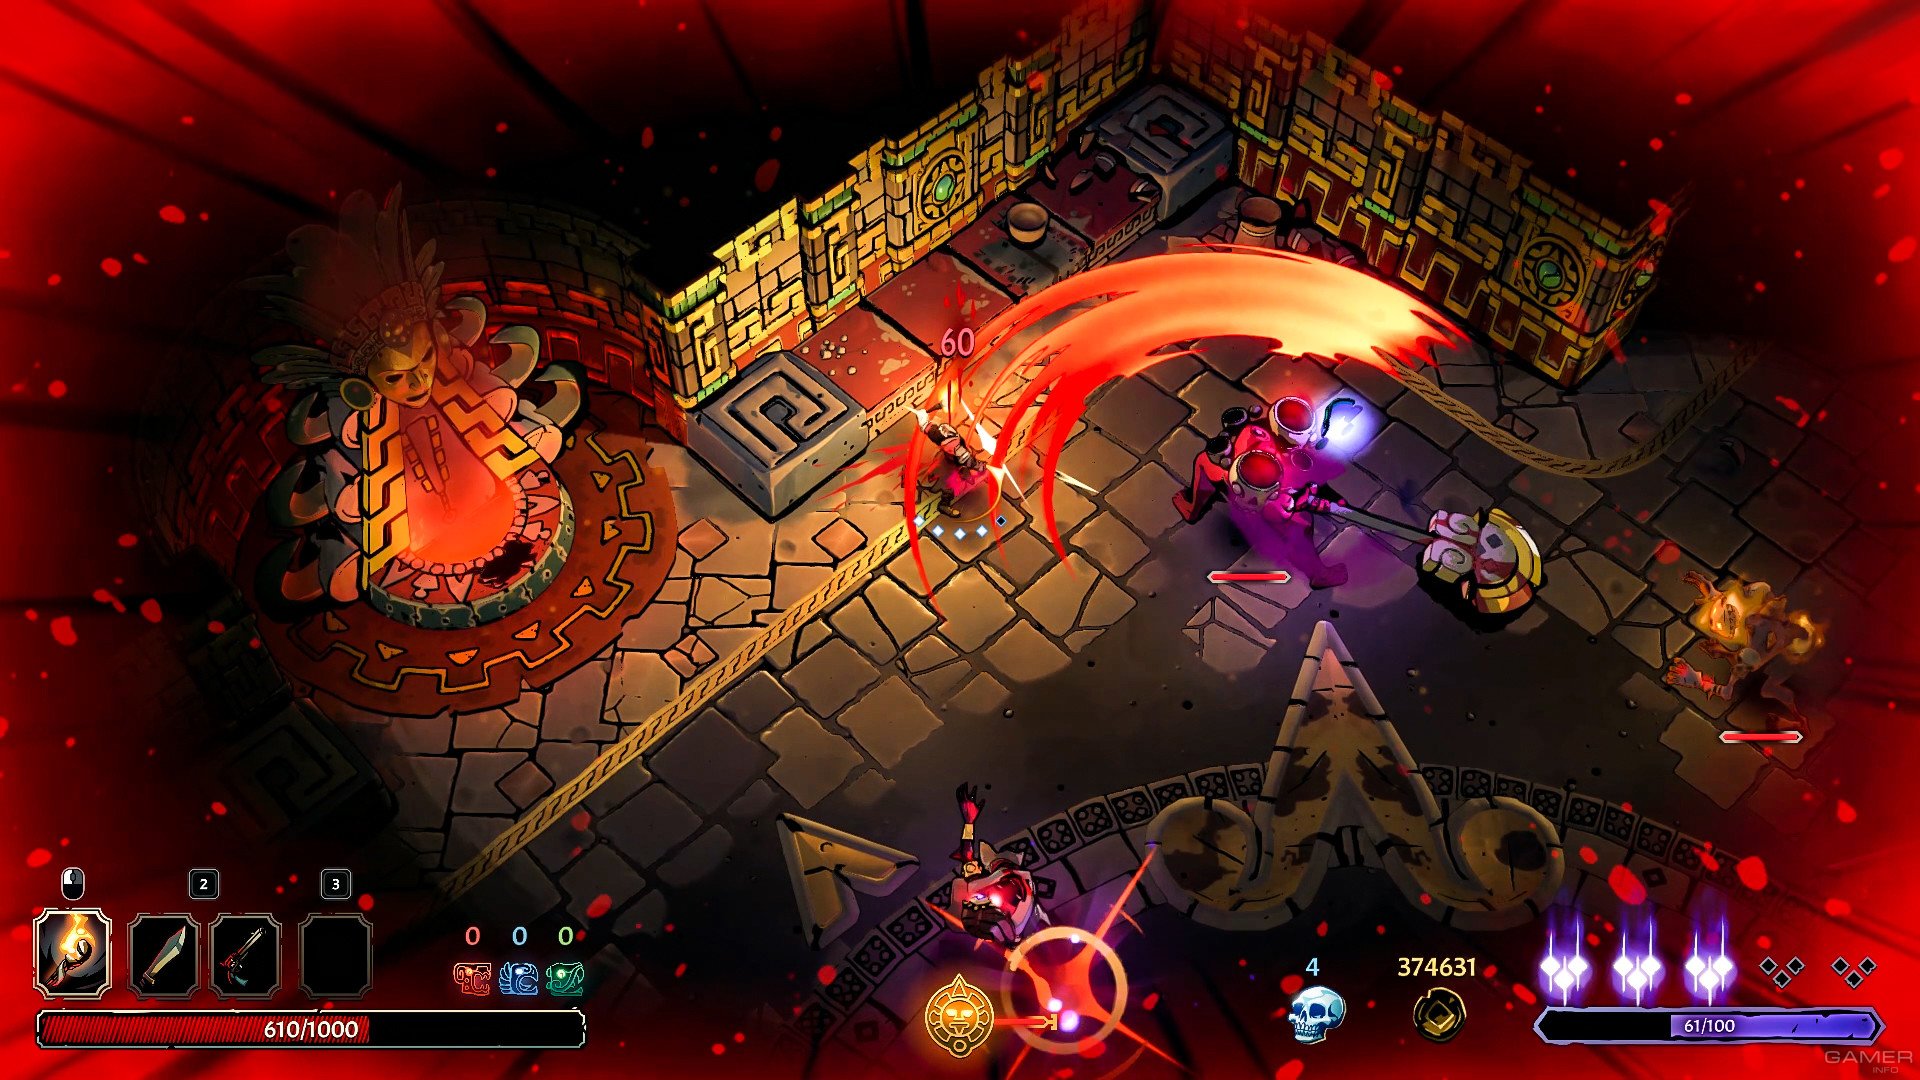 Curse of the Dead Gods for apple download